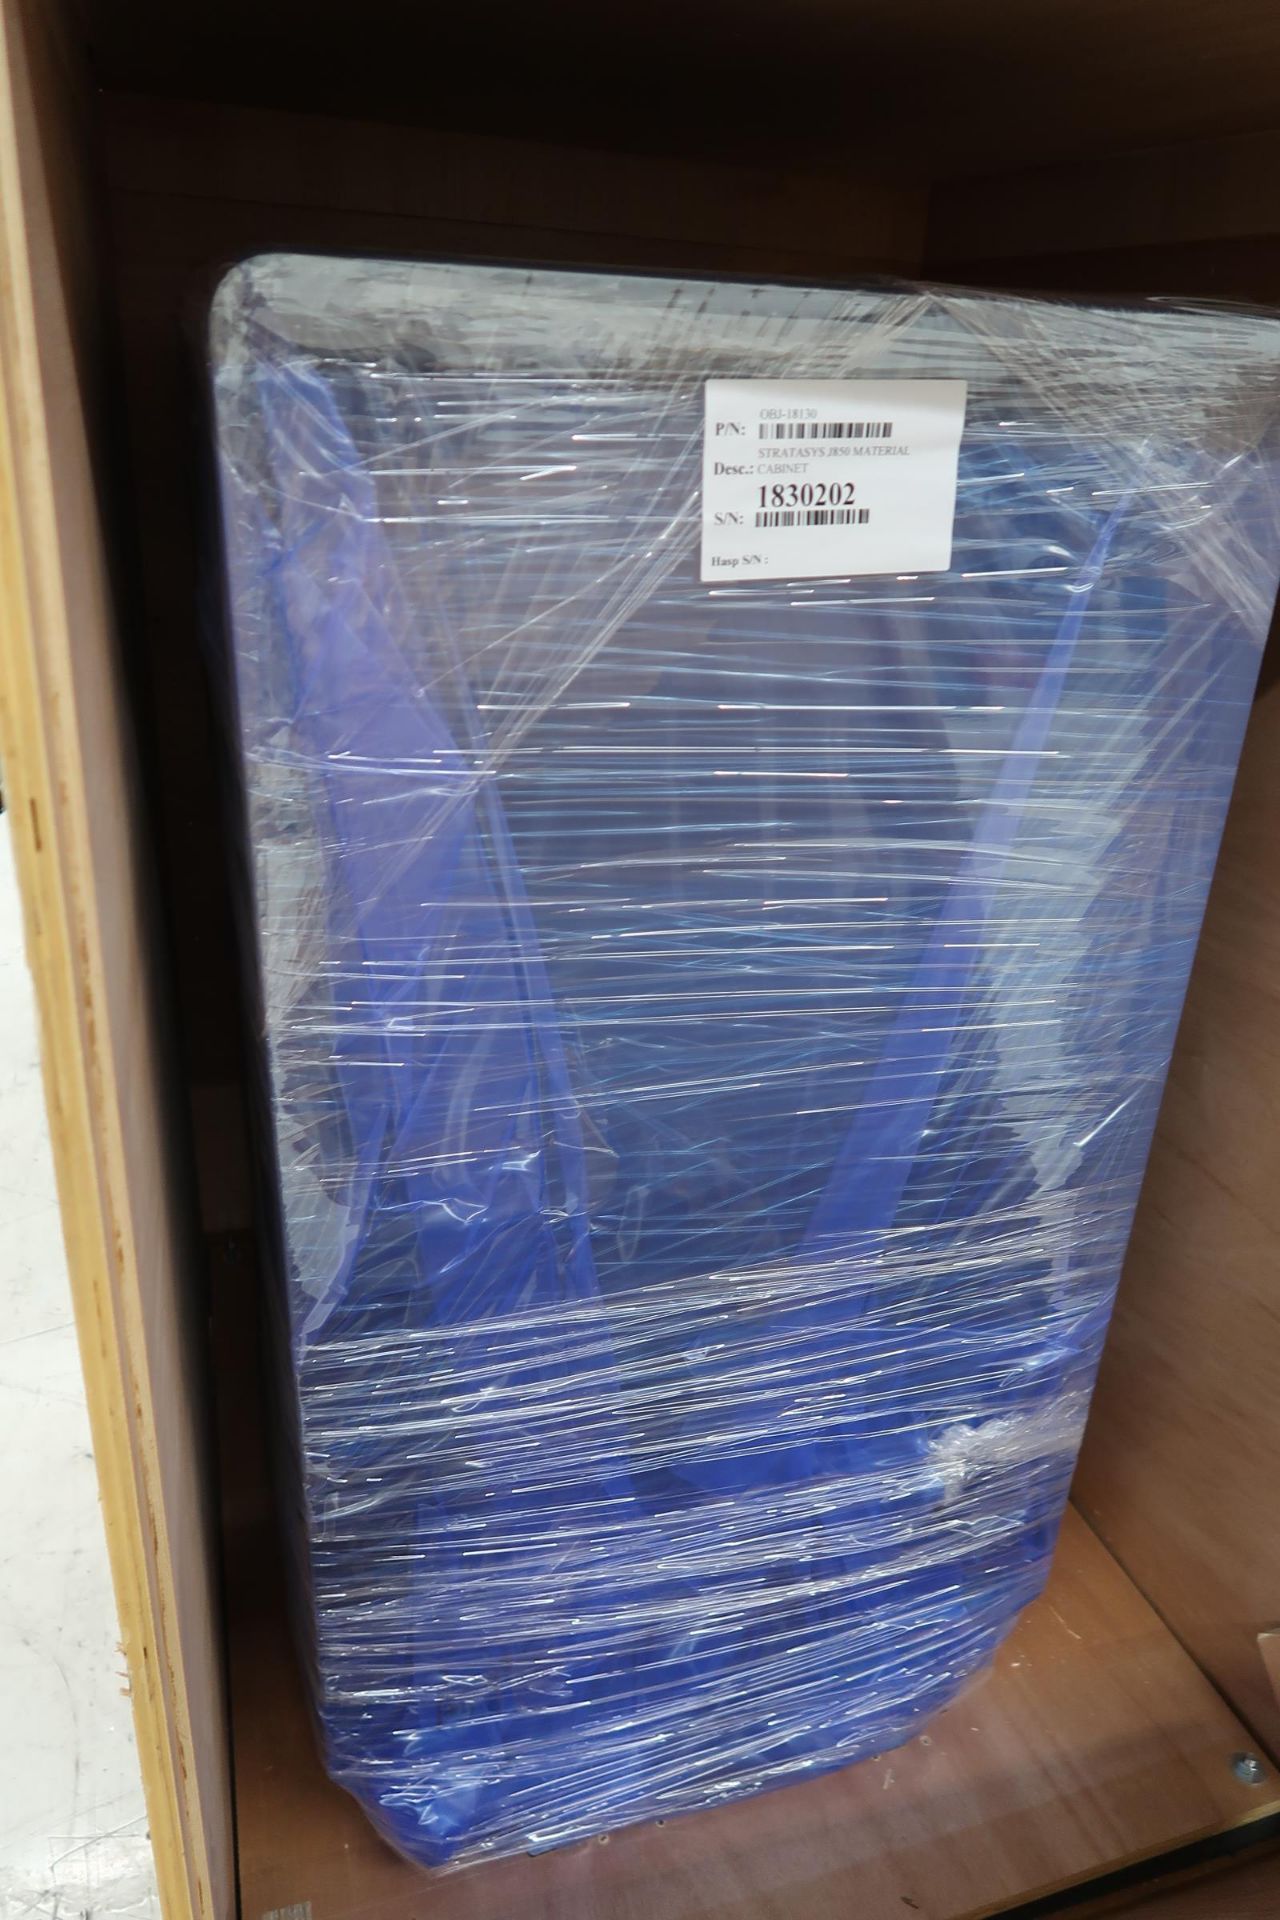 Stratasys OBJ18130 Duplex Material Cabinet s/n 183202 (NEW IN CRATE For J850 3D Printers) SOLD AS IS - Image 3 of 9